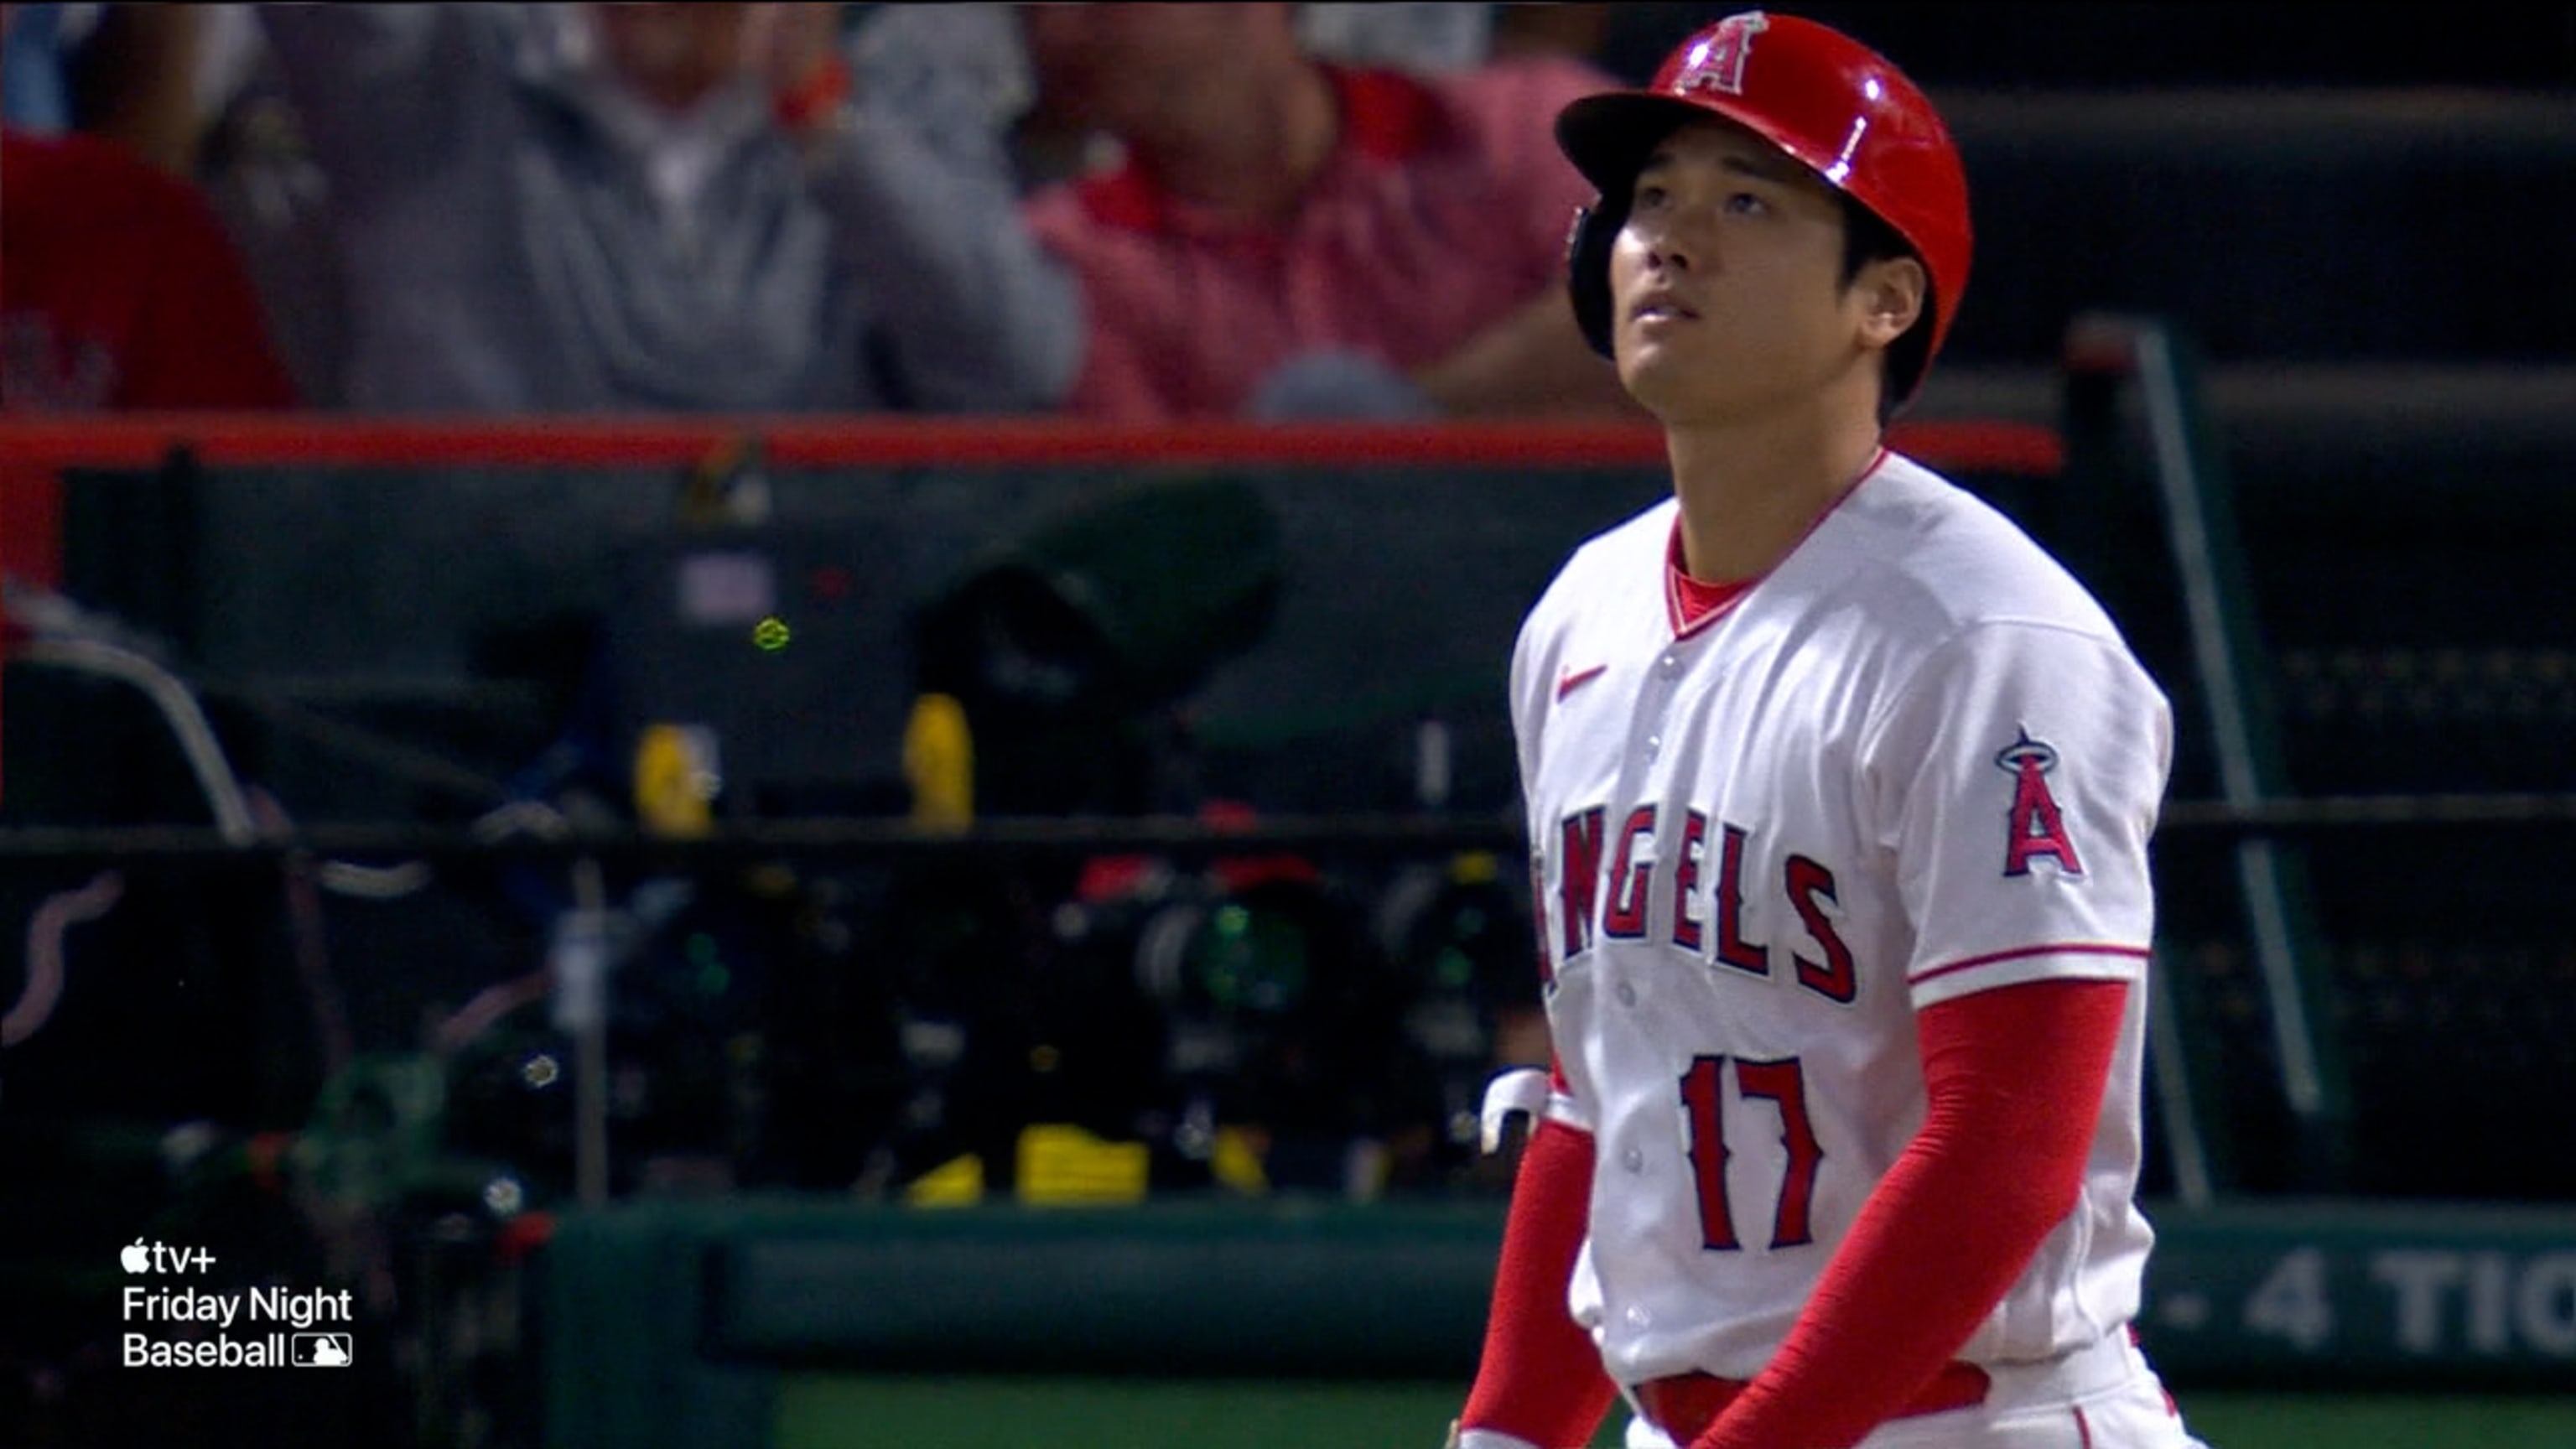 Ohtani hits the longest home run of his MLB career (493 feet) to